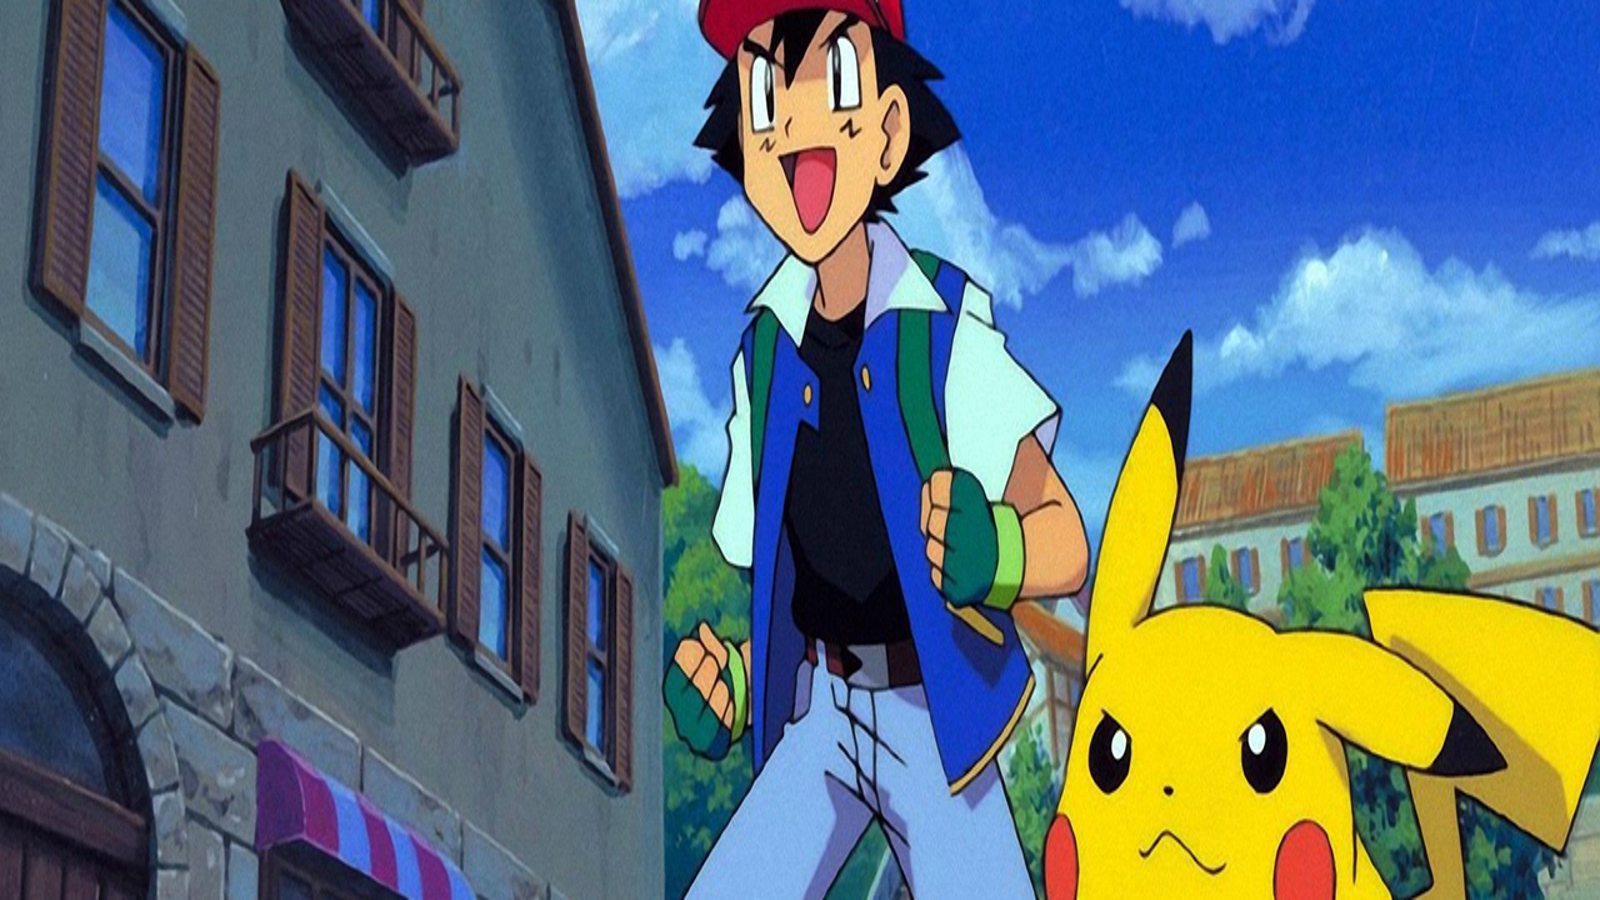 Next Pokemon Anime Revealed With New Art Style and Companion - IGN